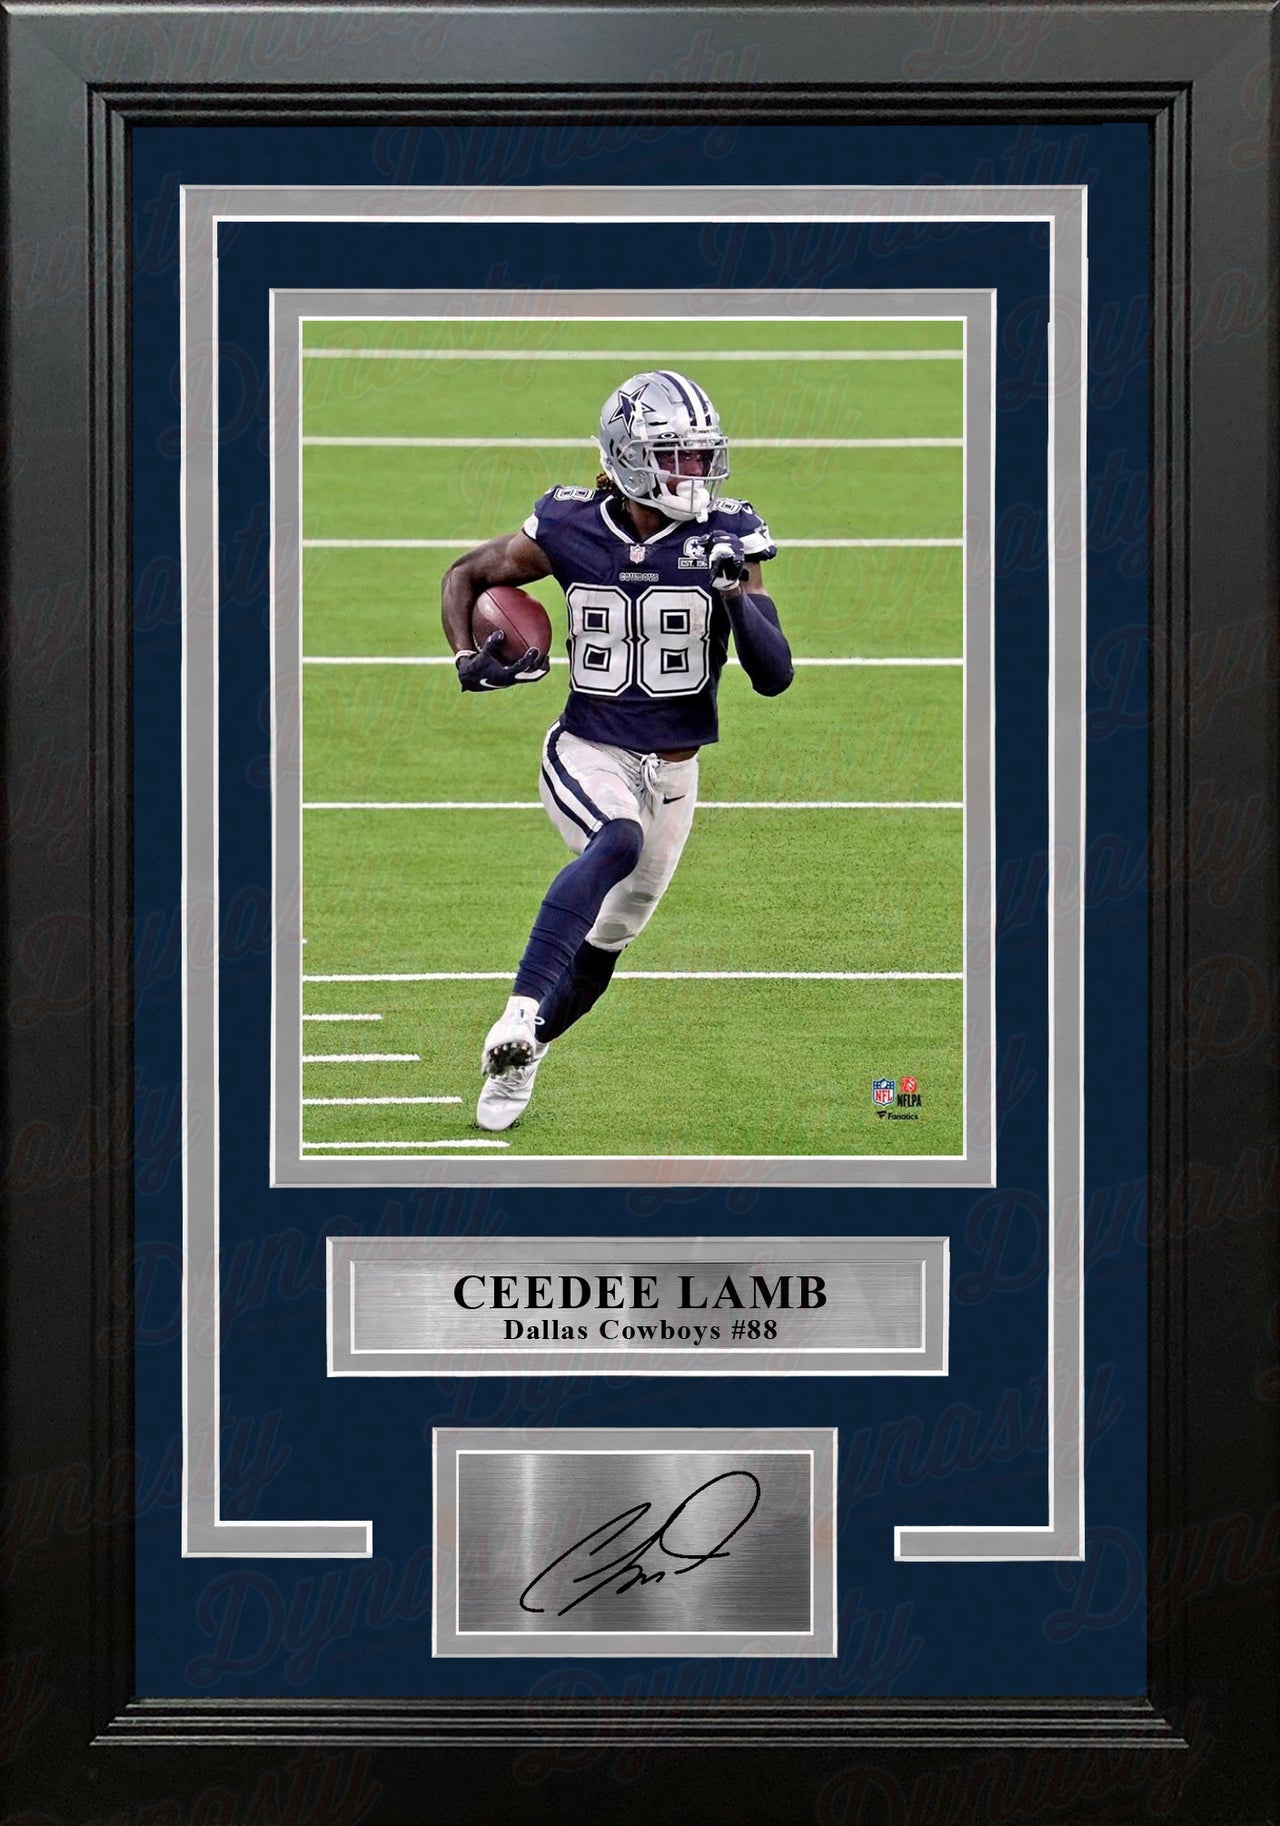 CeeDee Lamb in Action Dallas Cowboys 8" x 10" Framed Football Photo with Engraved Autograph - Dynasty Sports & Framing 